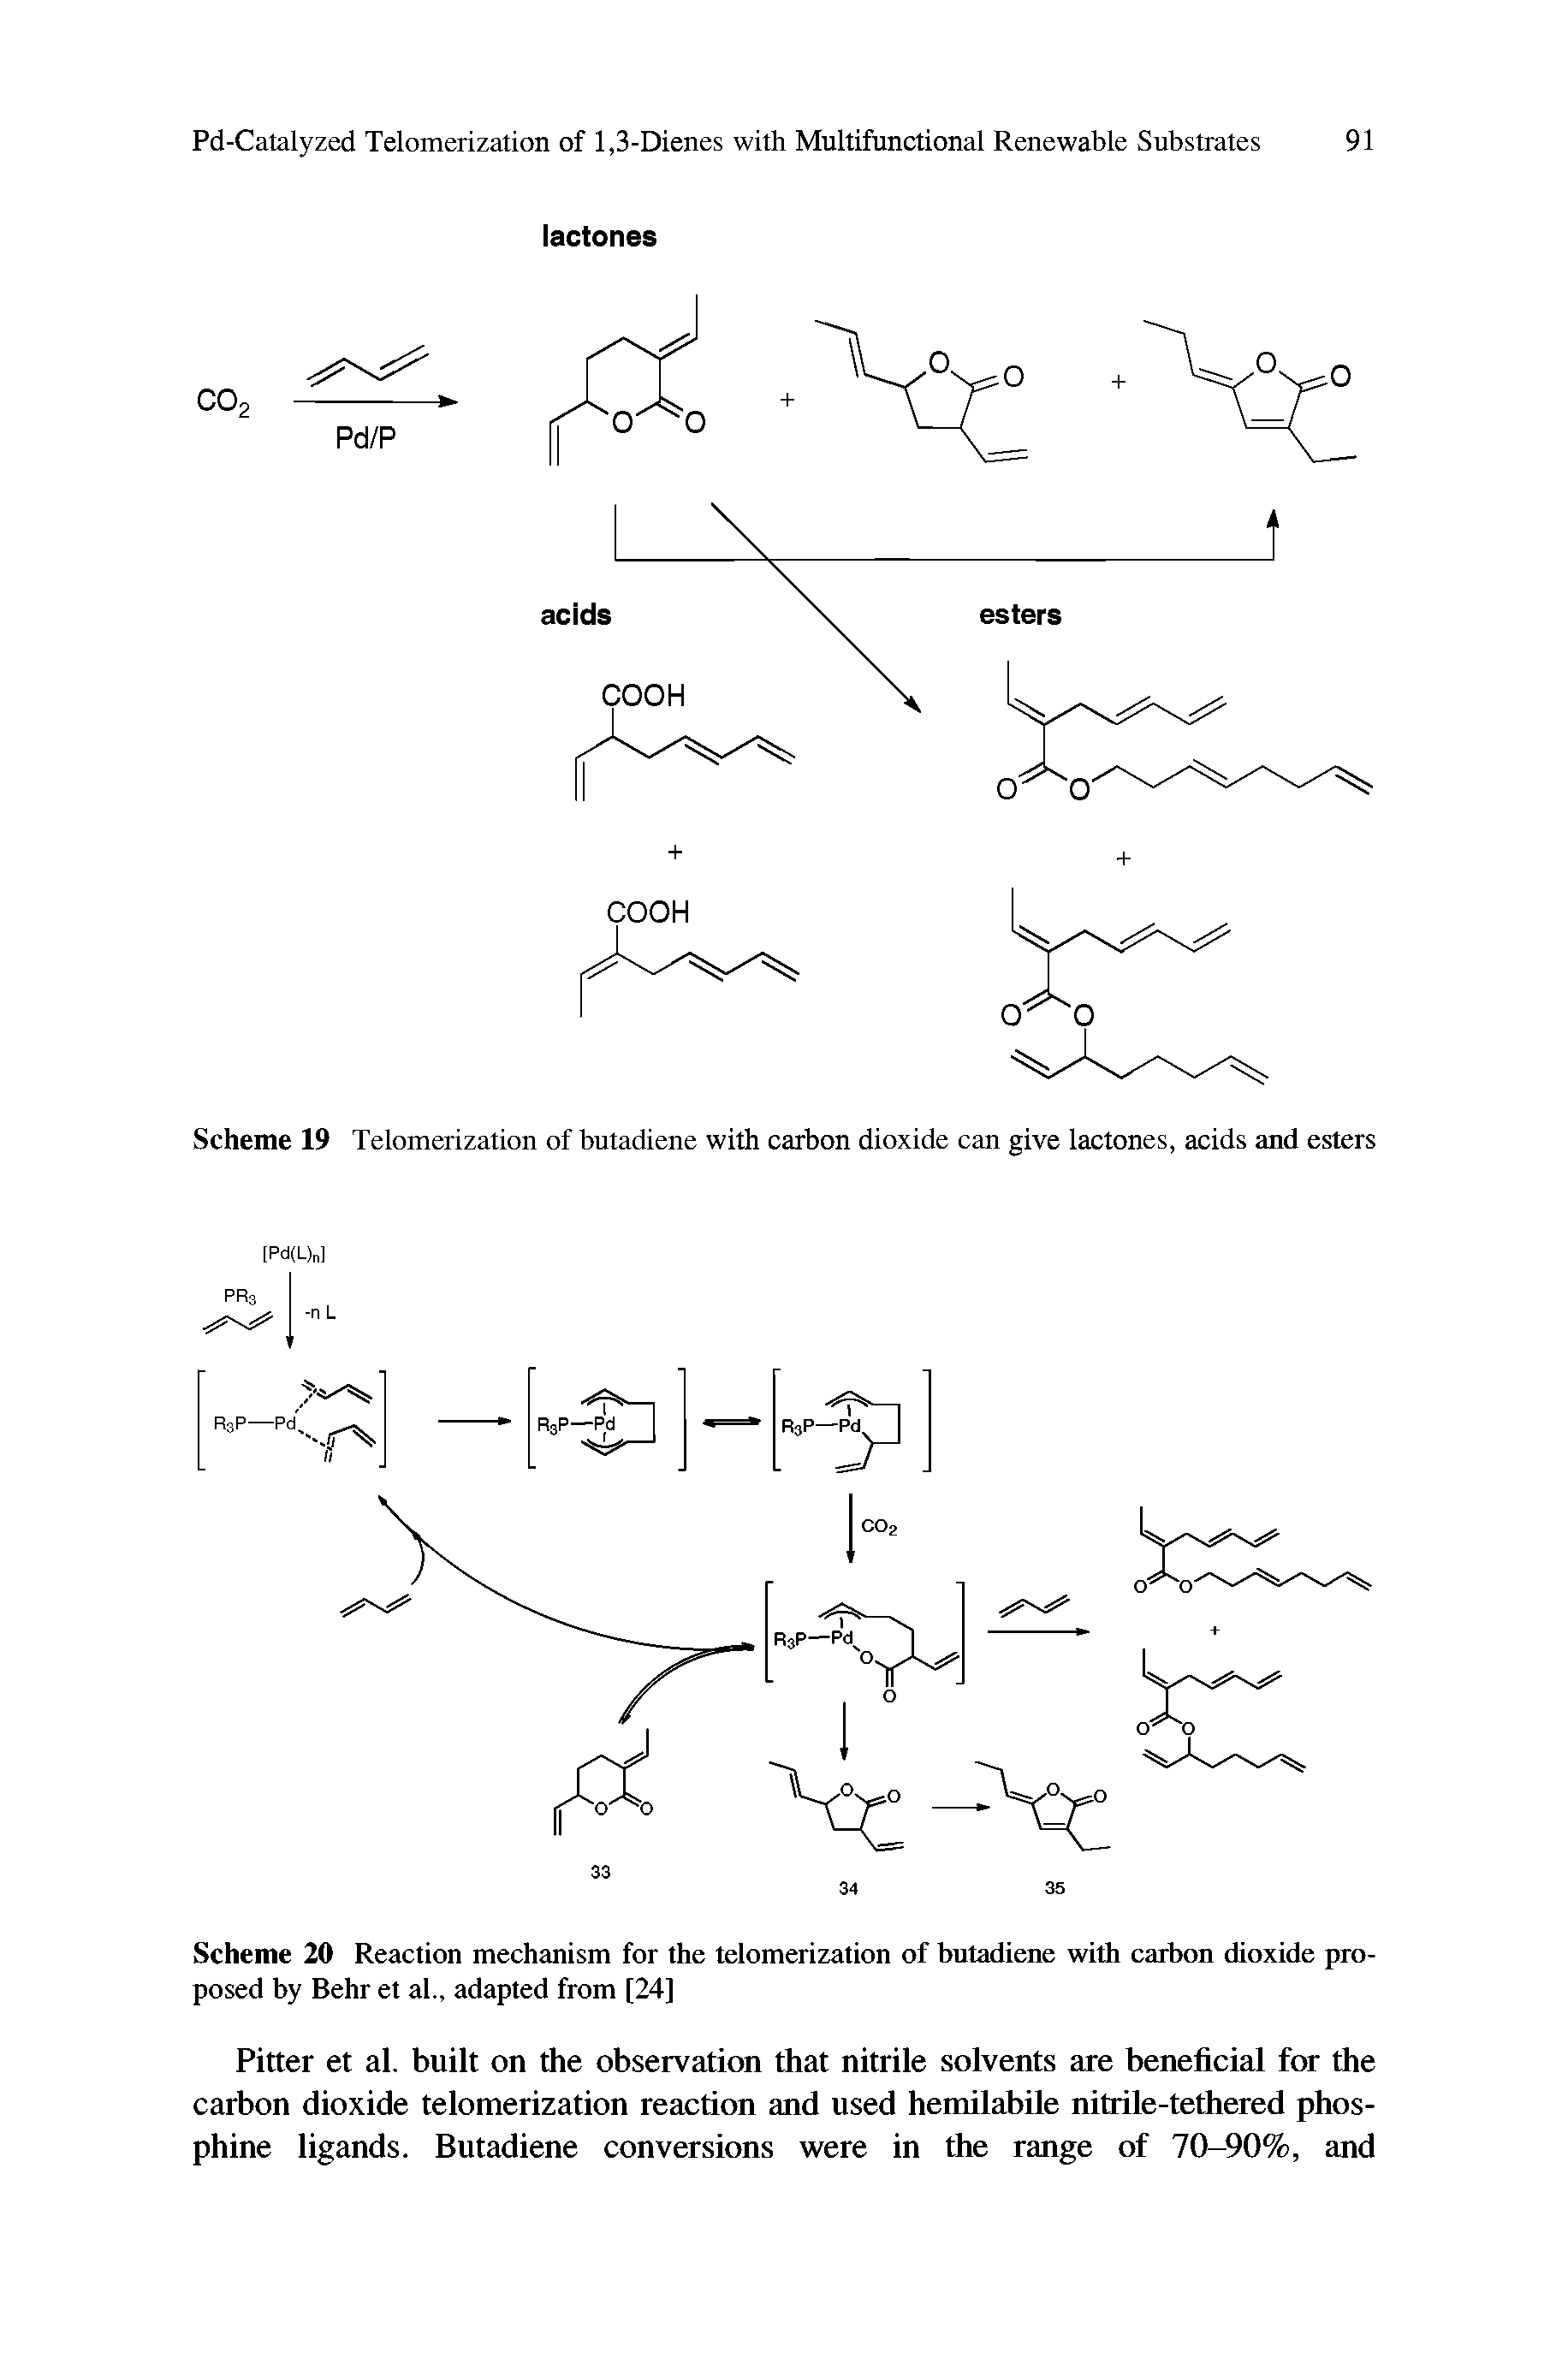 Scheme 20 Reaction mechanism for the telomerization of butadiene with carbon dioxide proposed by Behr et al., adapted from [24]...